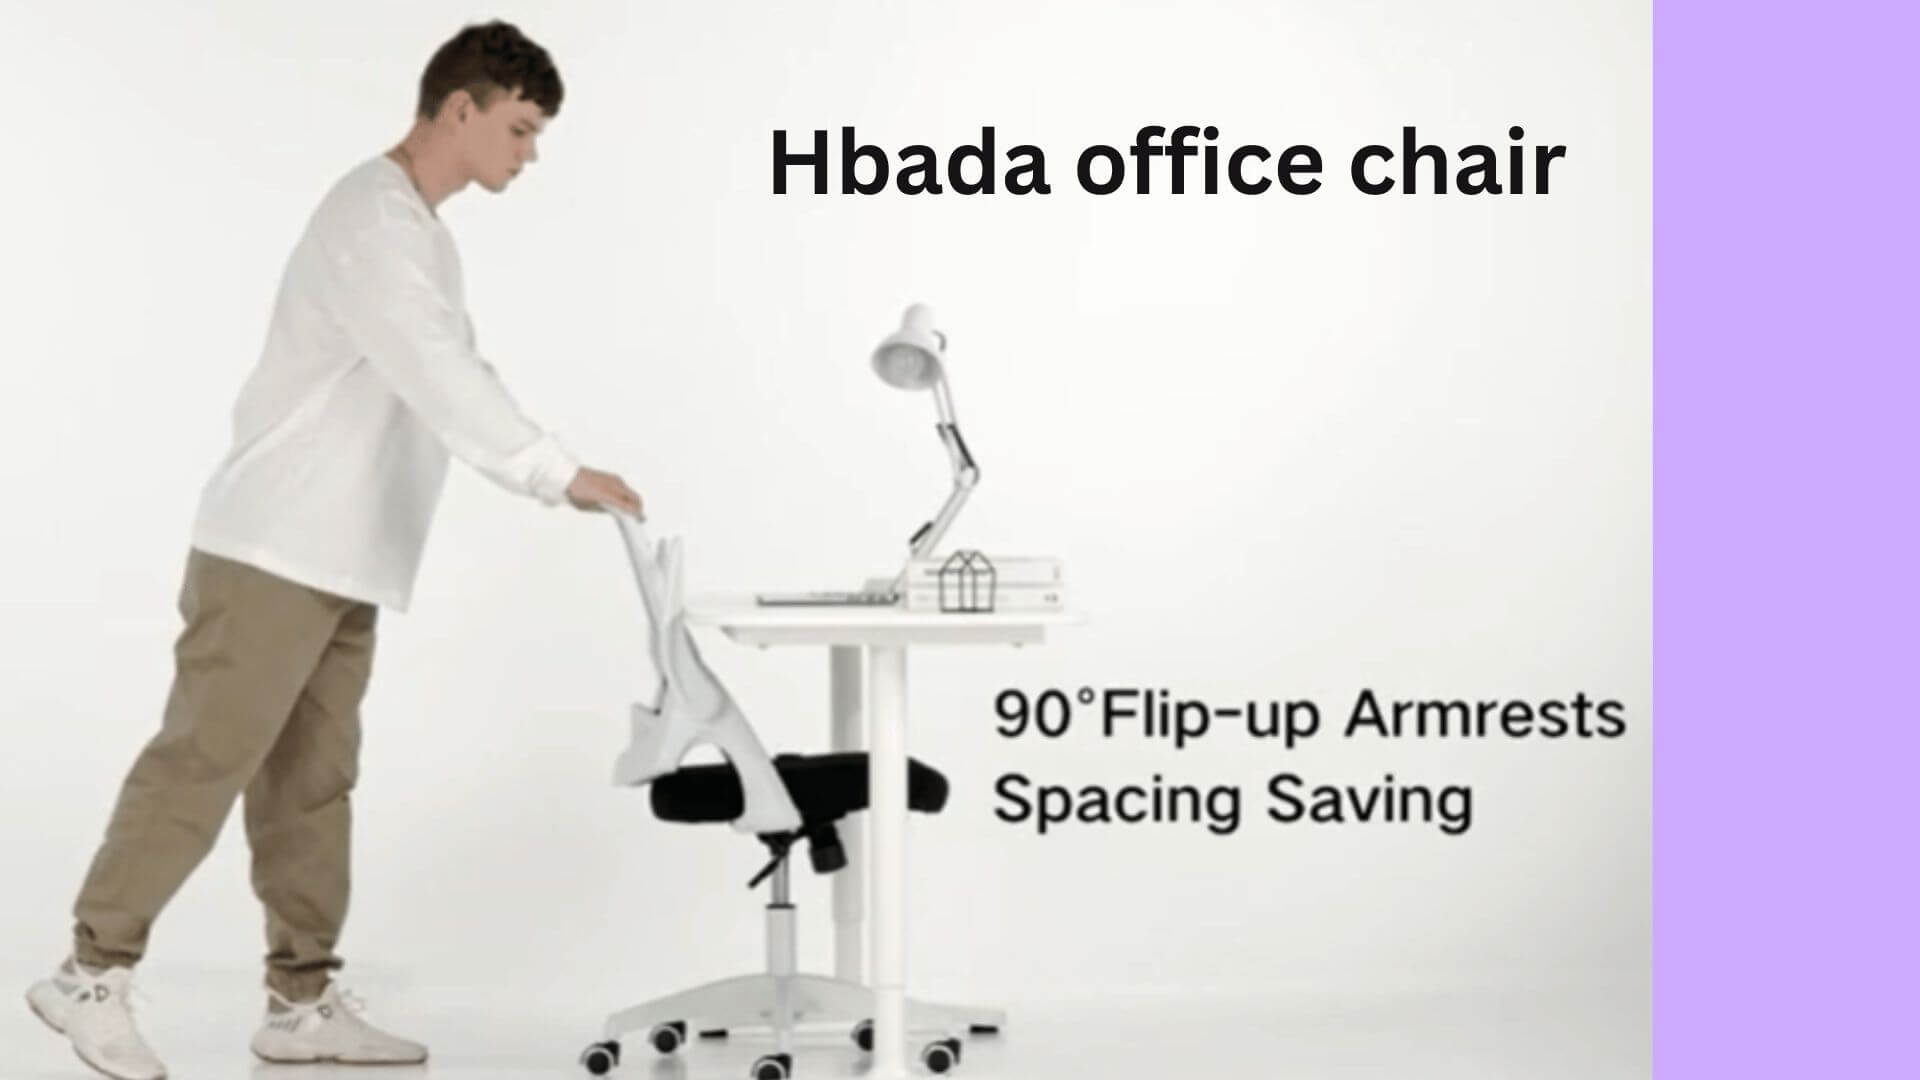 Hbada Office Chair REVIEW